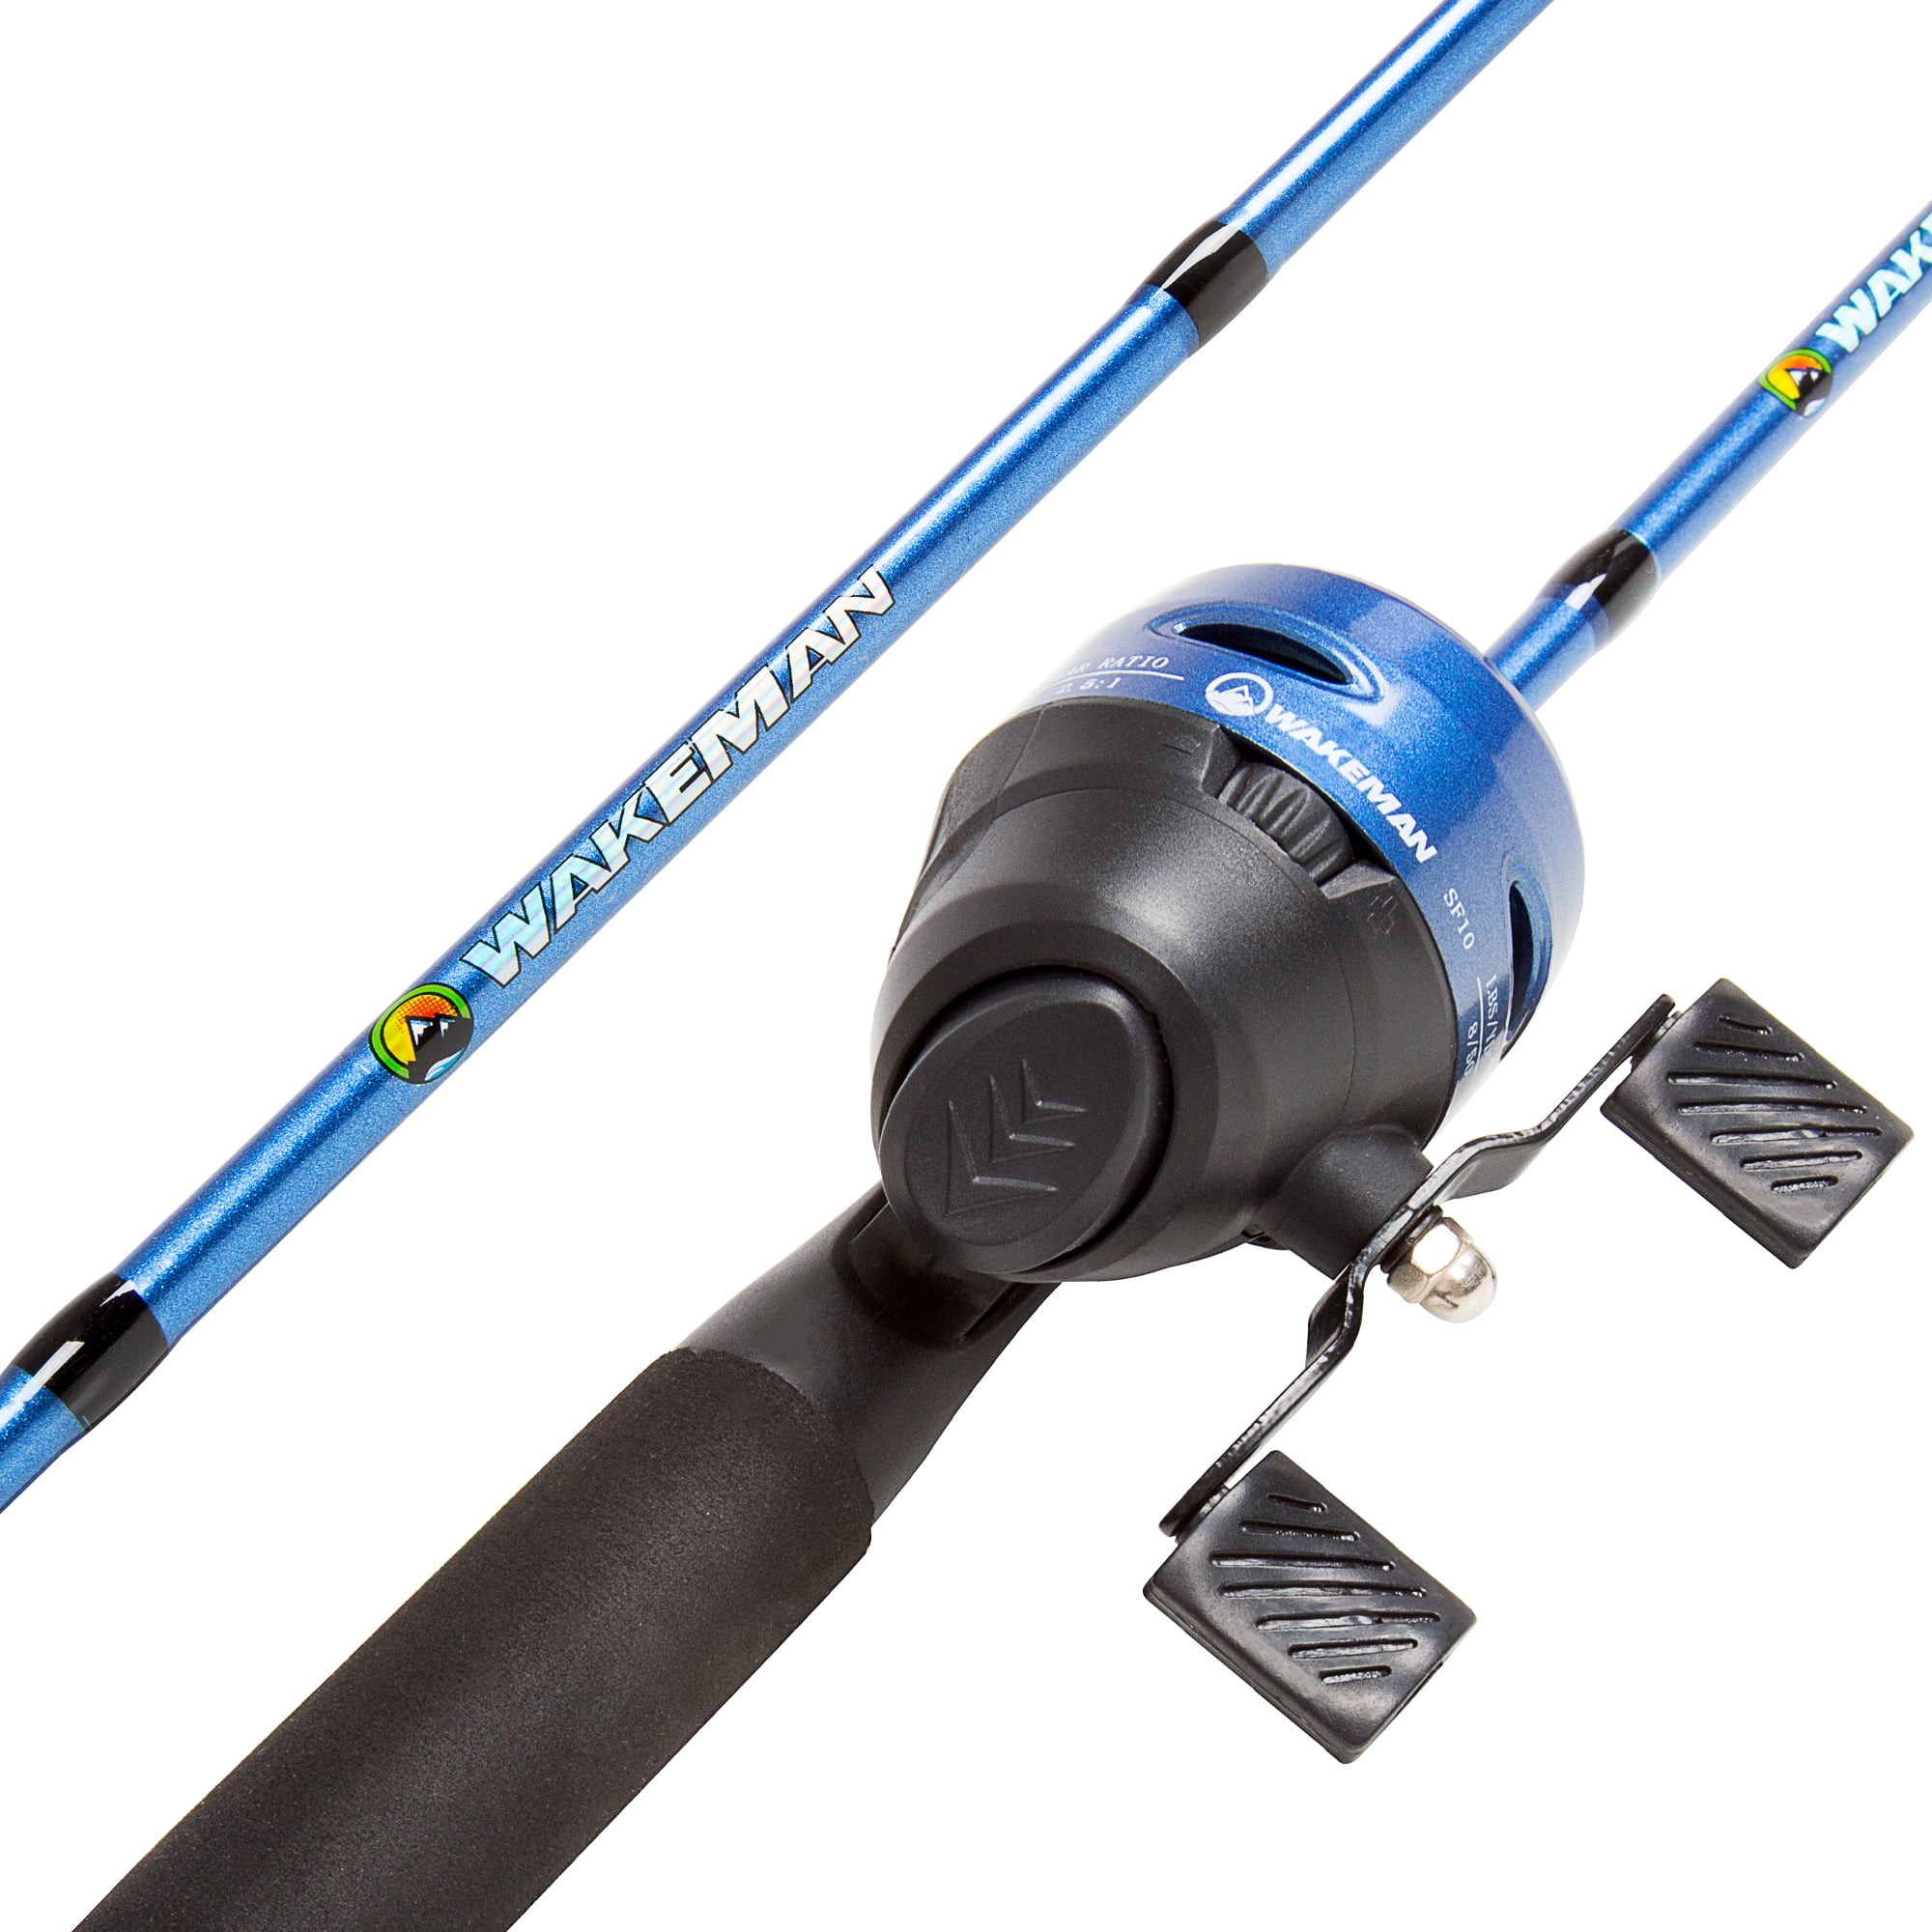 Trademark Games Turquoise 6 ft. Fiberglass Fishing Rod and Reel Combo - Portable 2-Piece Pole with 2000 Aluminum Spinning Reel